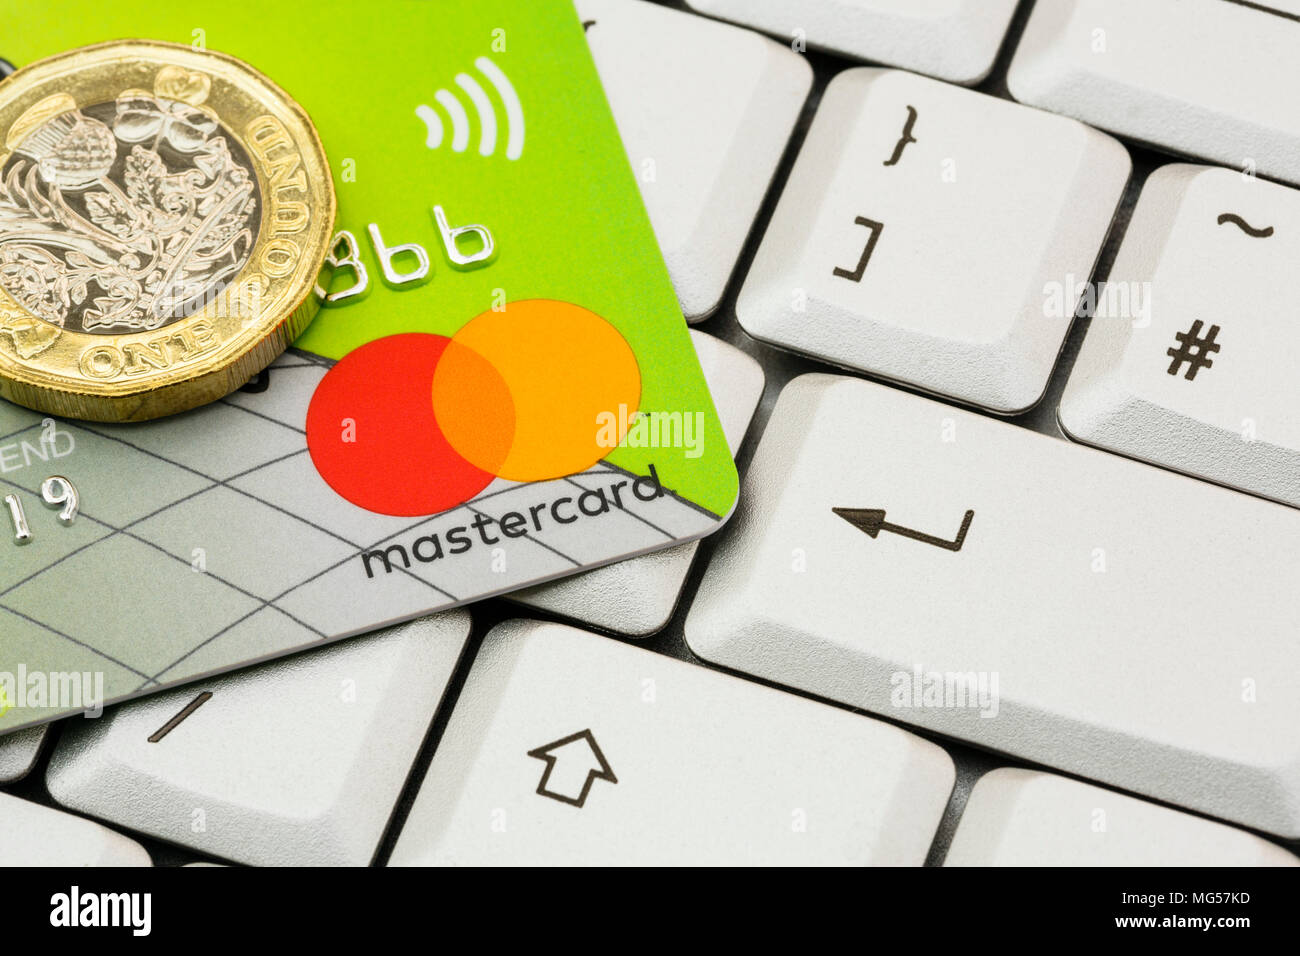 Lloyds bank Mastercard contactless credit card and one pound coin on a computer keyboard with enter key. Online internet shopping concept. England UK Stock Photo